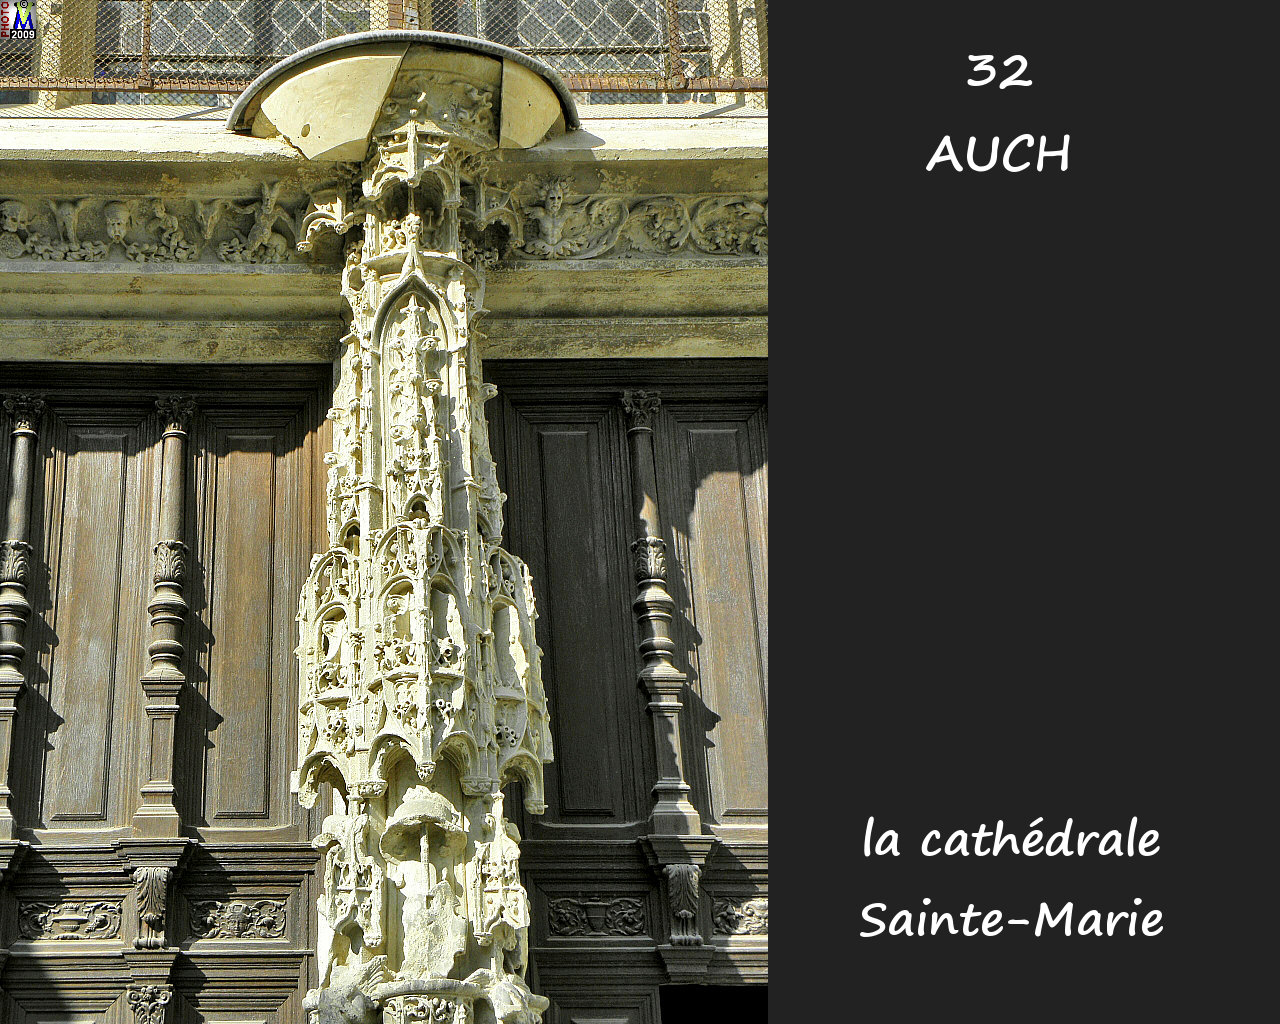 32AUCH_cathedrale_130.jpg